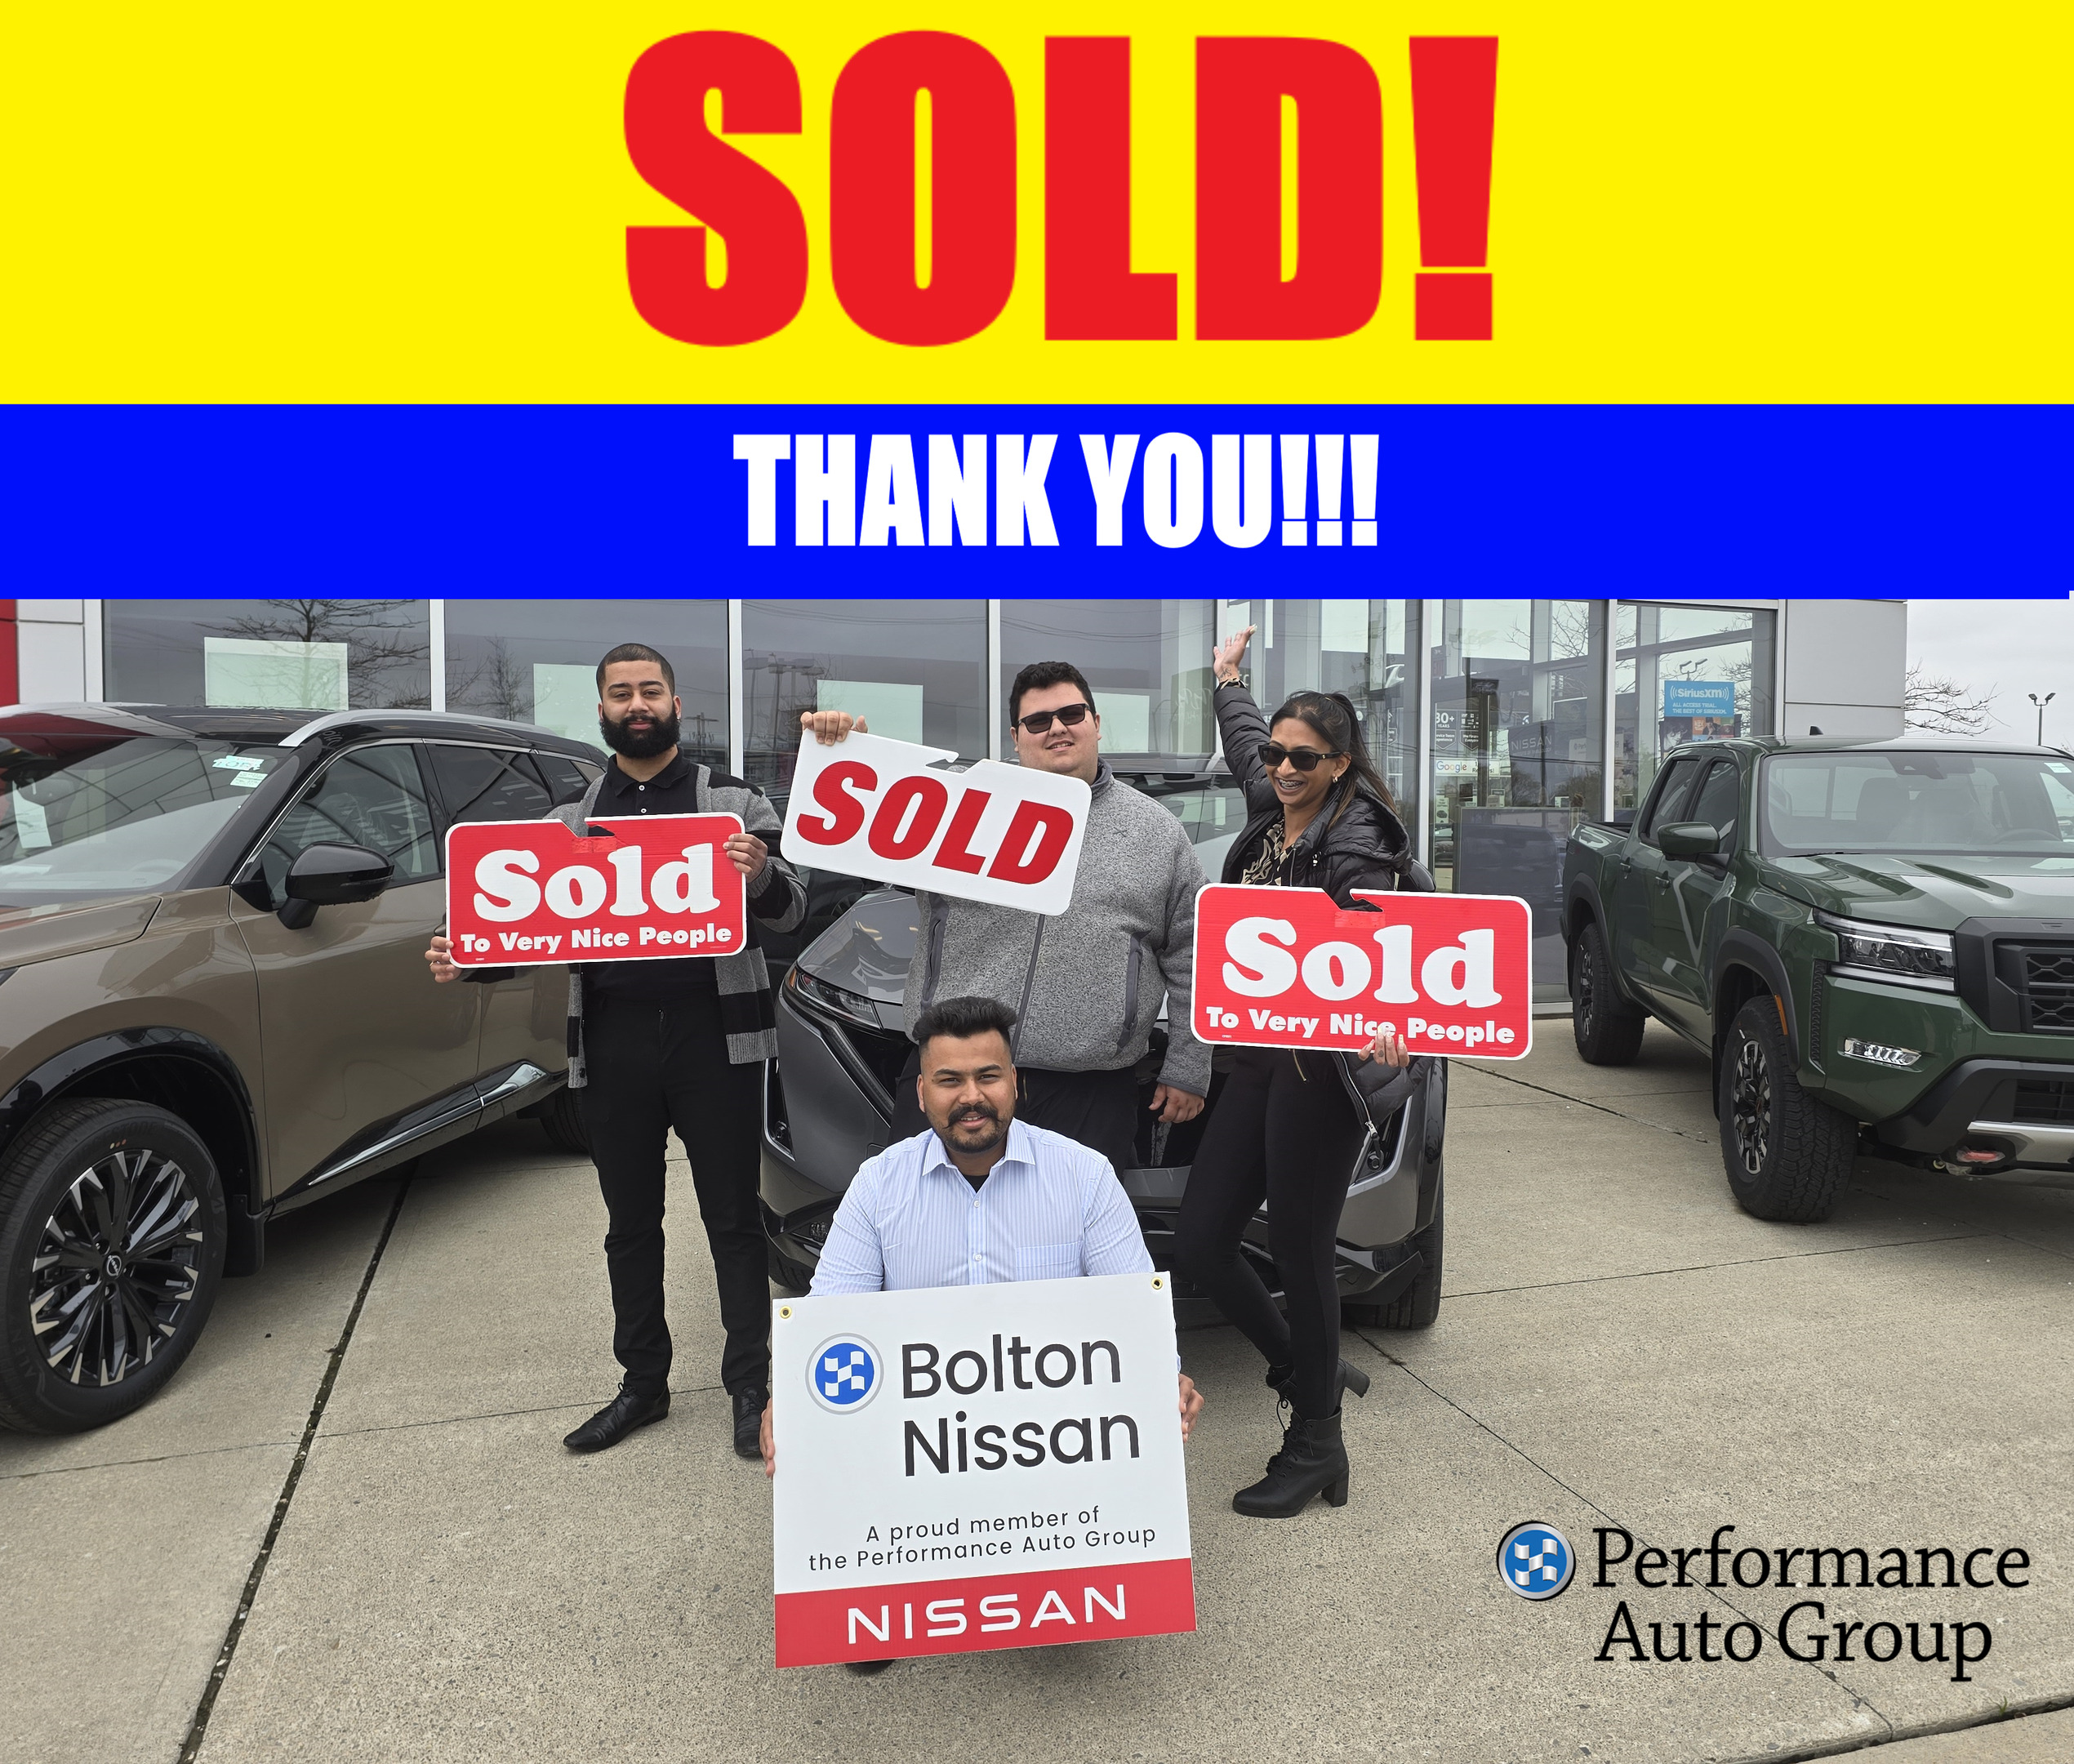 2020 Nissan Rogue SV AWD*SOLD - THANK YOU!*